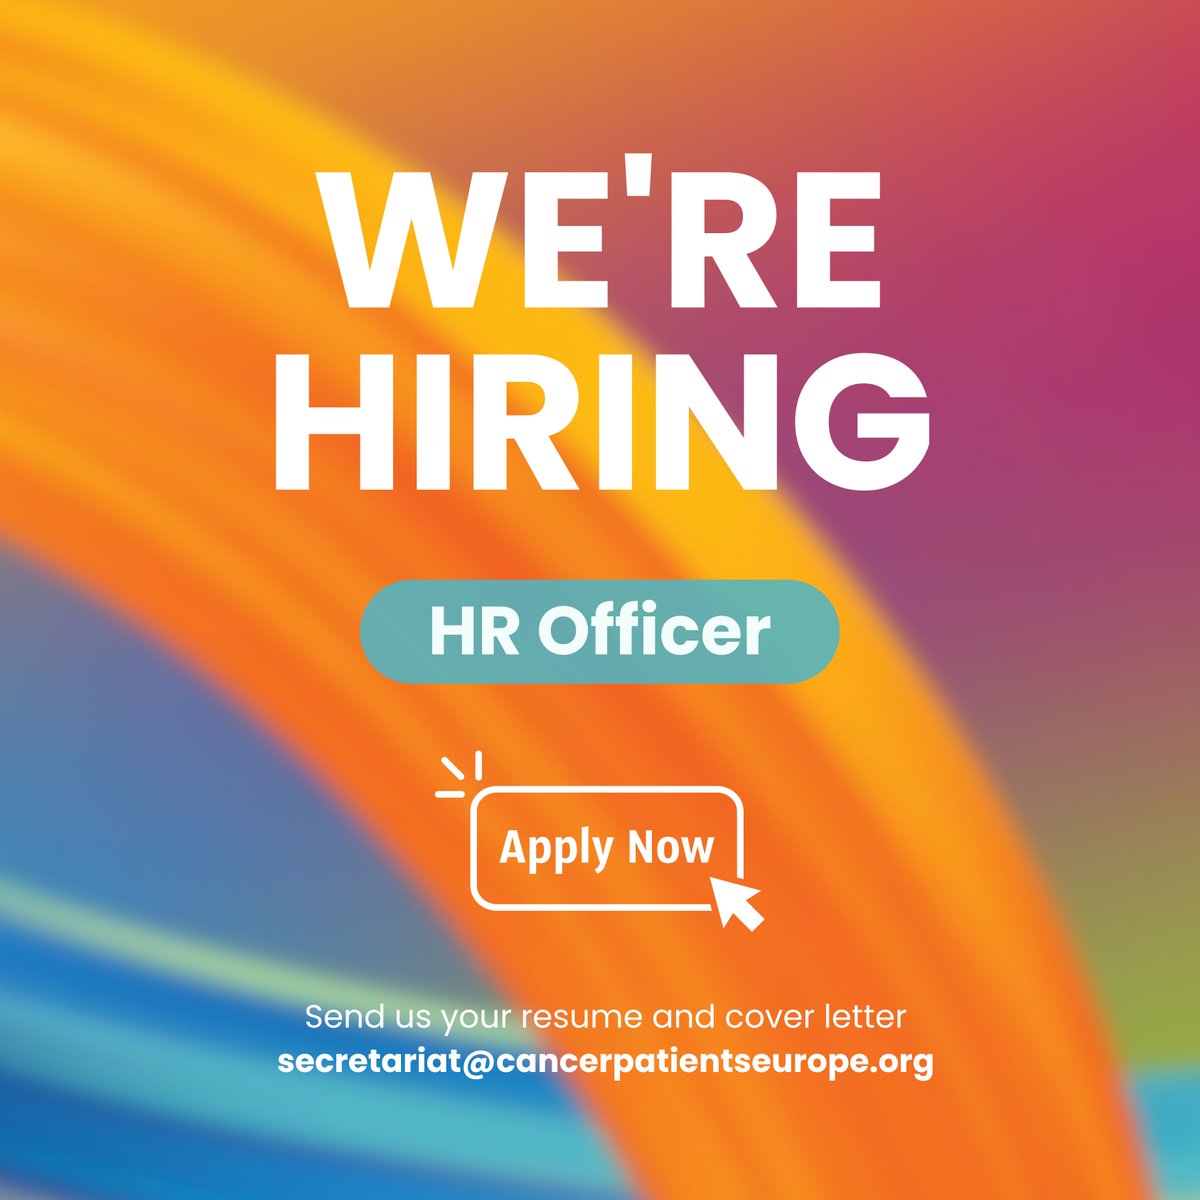 📢 Ready to take the next step in your HR career? Check our HR Officer Vacancy and, if interested, send us your CV and motivation letter by the 22nd of February at the latest!📆🔍

Read the job description ➡ rb.gy/7828mh

#HRJob #brusselsjobs  #eujobs